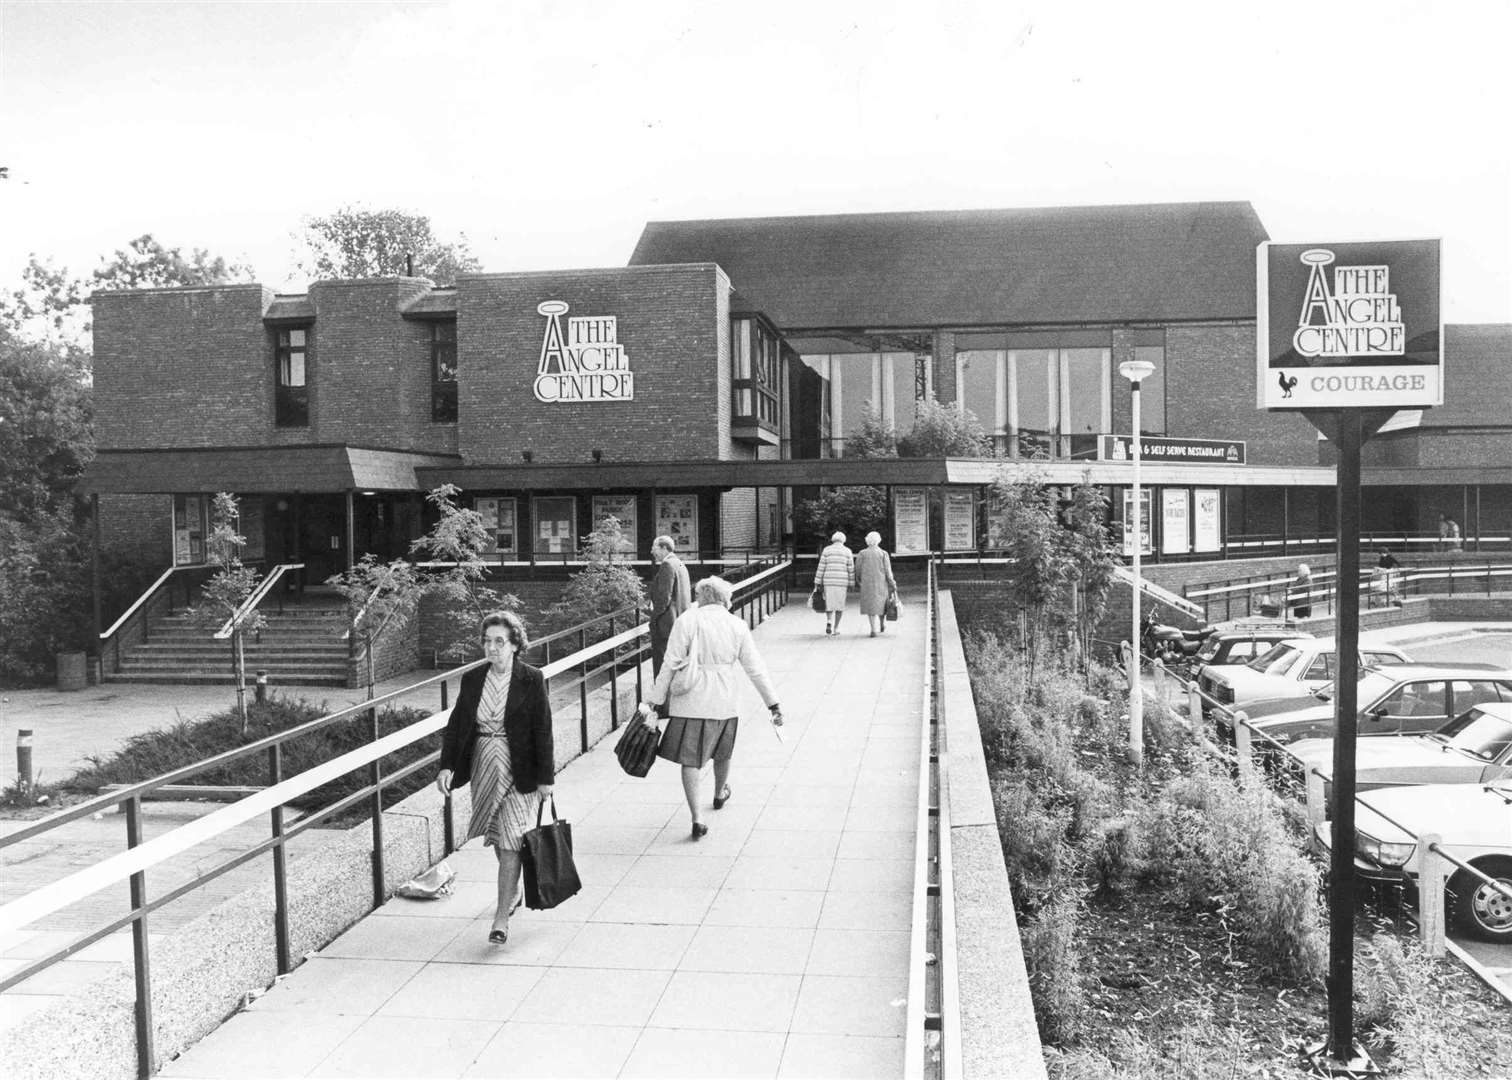 The Angel Centre as it looked in 1984